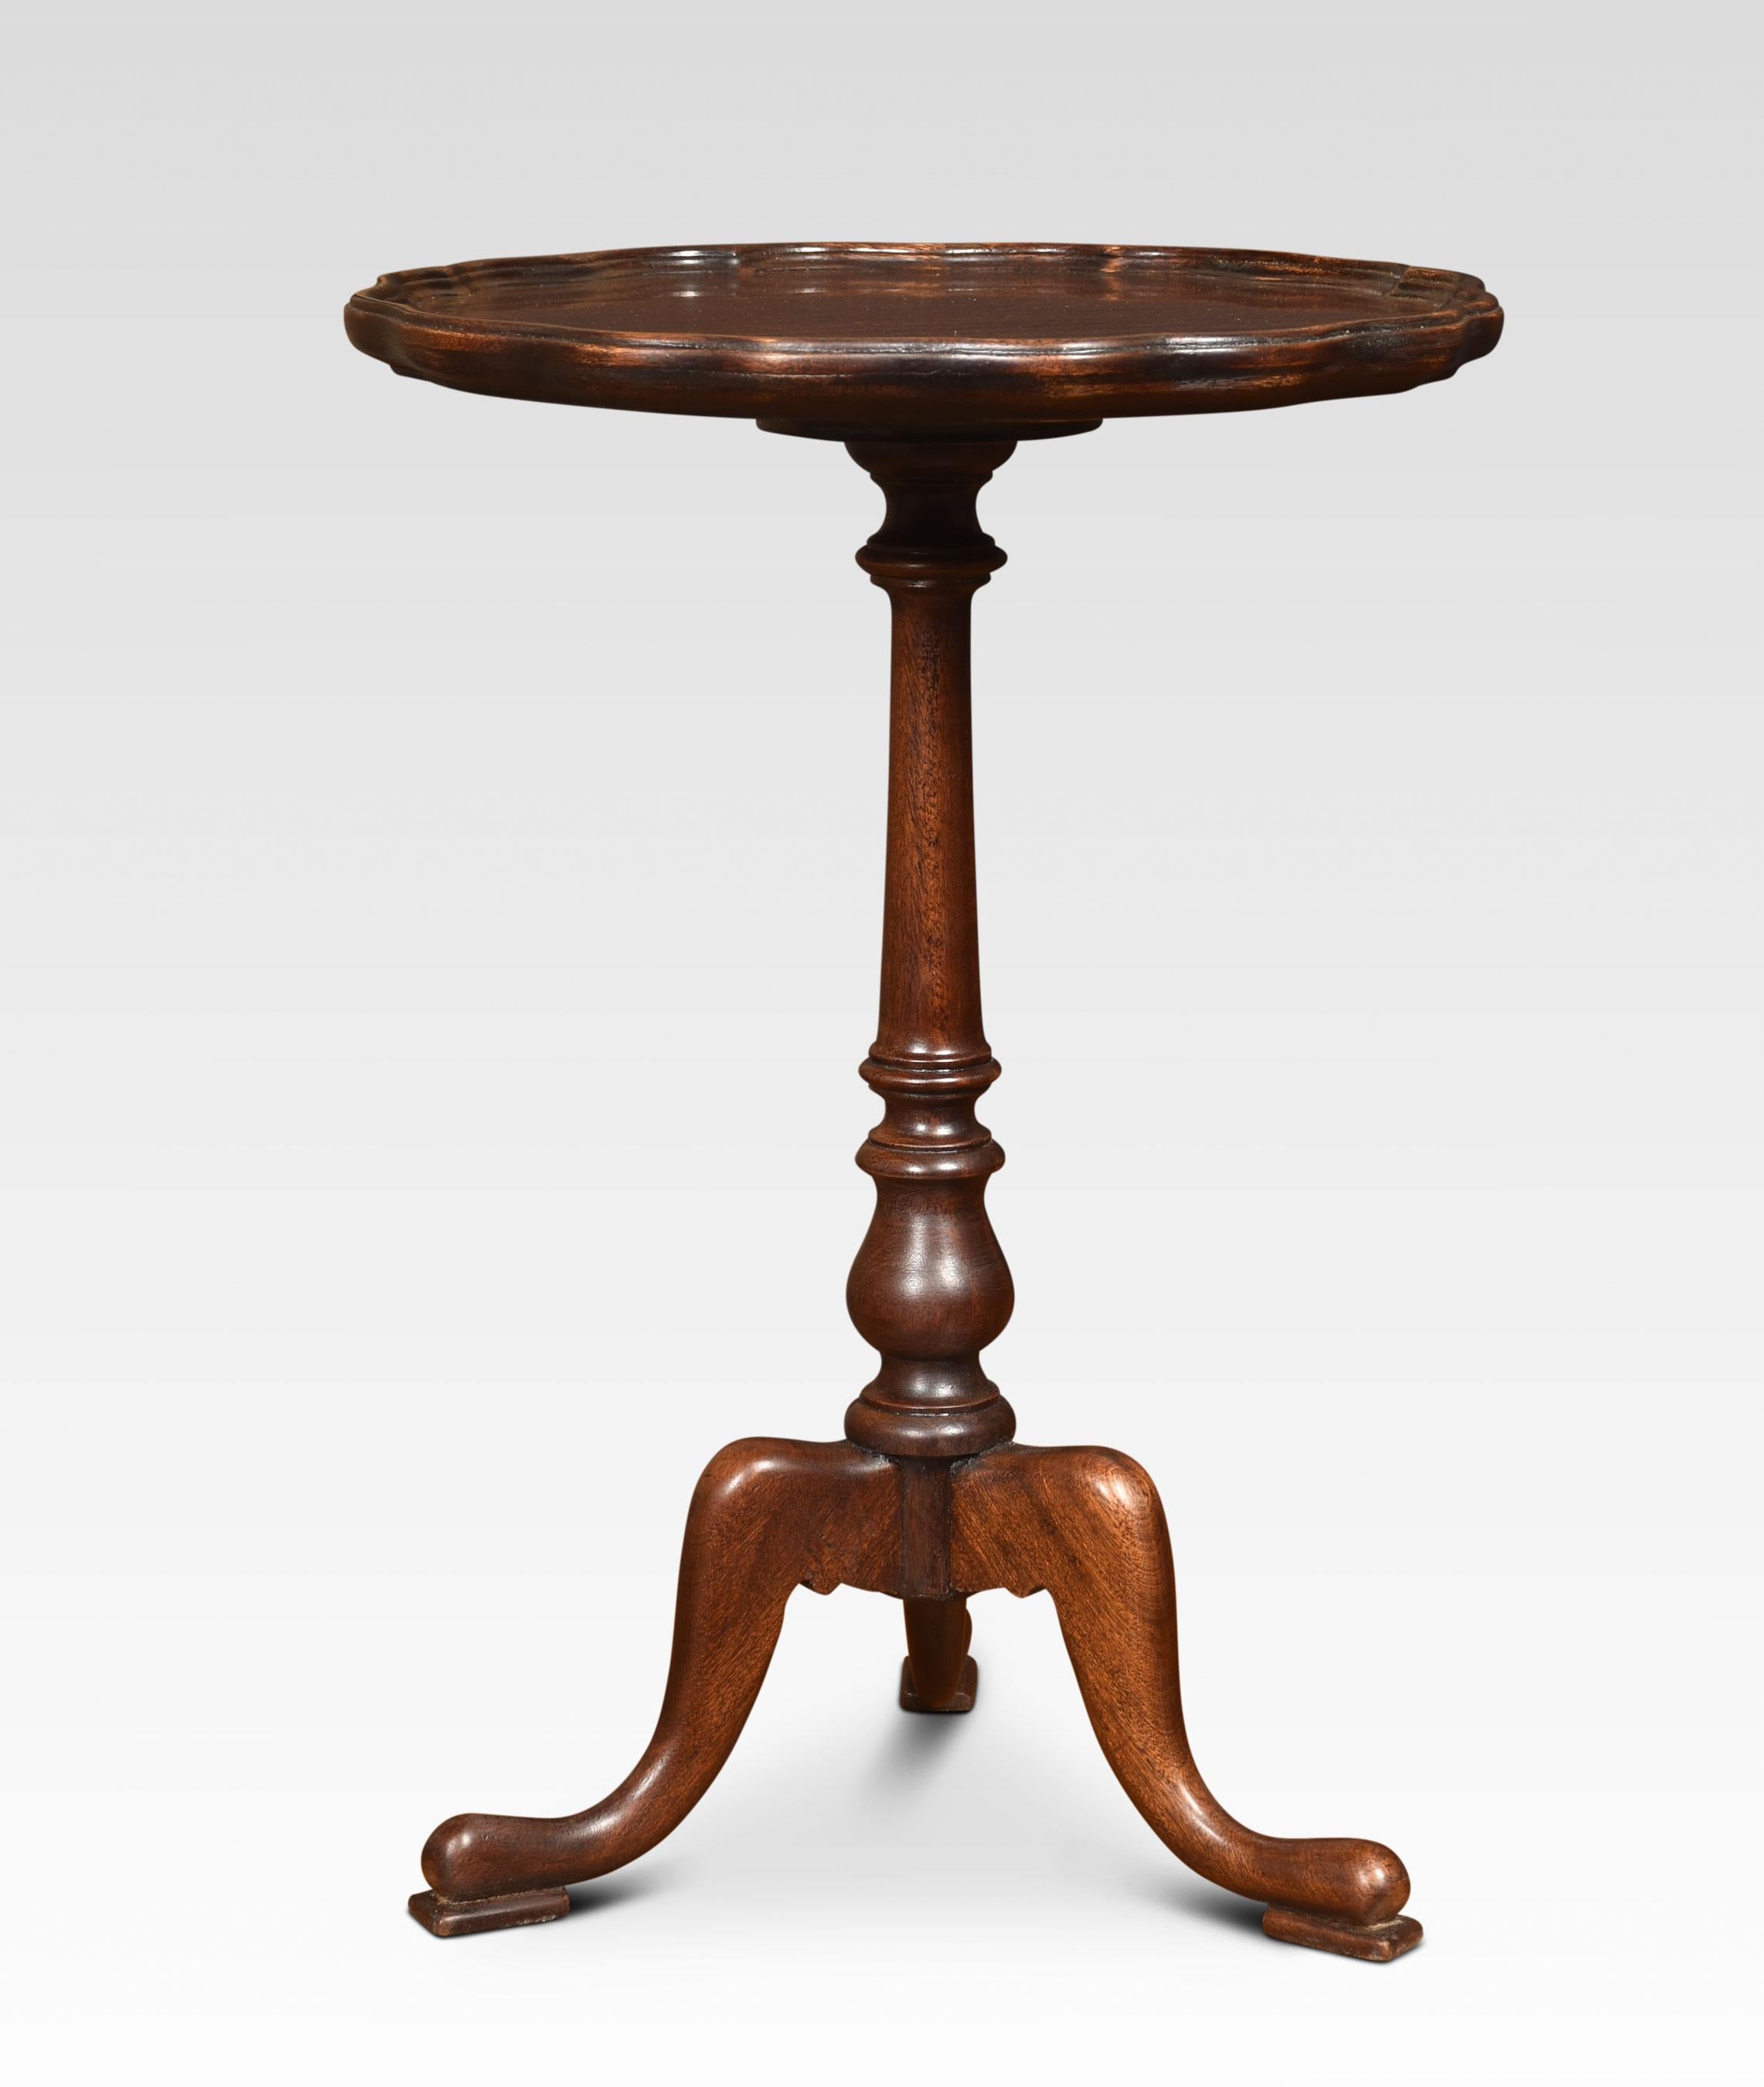 Pair of side tables the circular mahogany tops raised up on fluted stems on three downswept supports terminating in pad feet.
Dimensions
Height 22 Inches
Width 15.5 Inches
Depth 15.5 Inches.